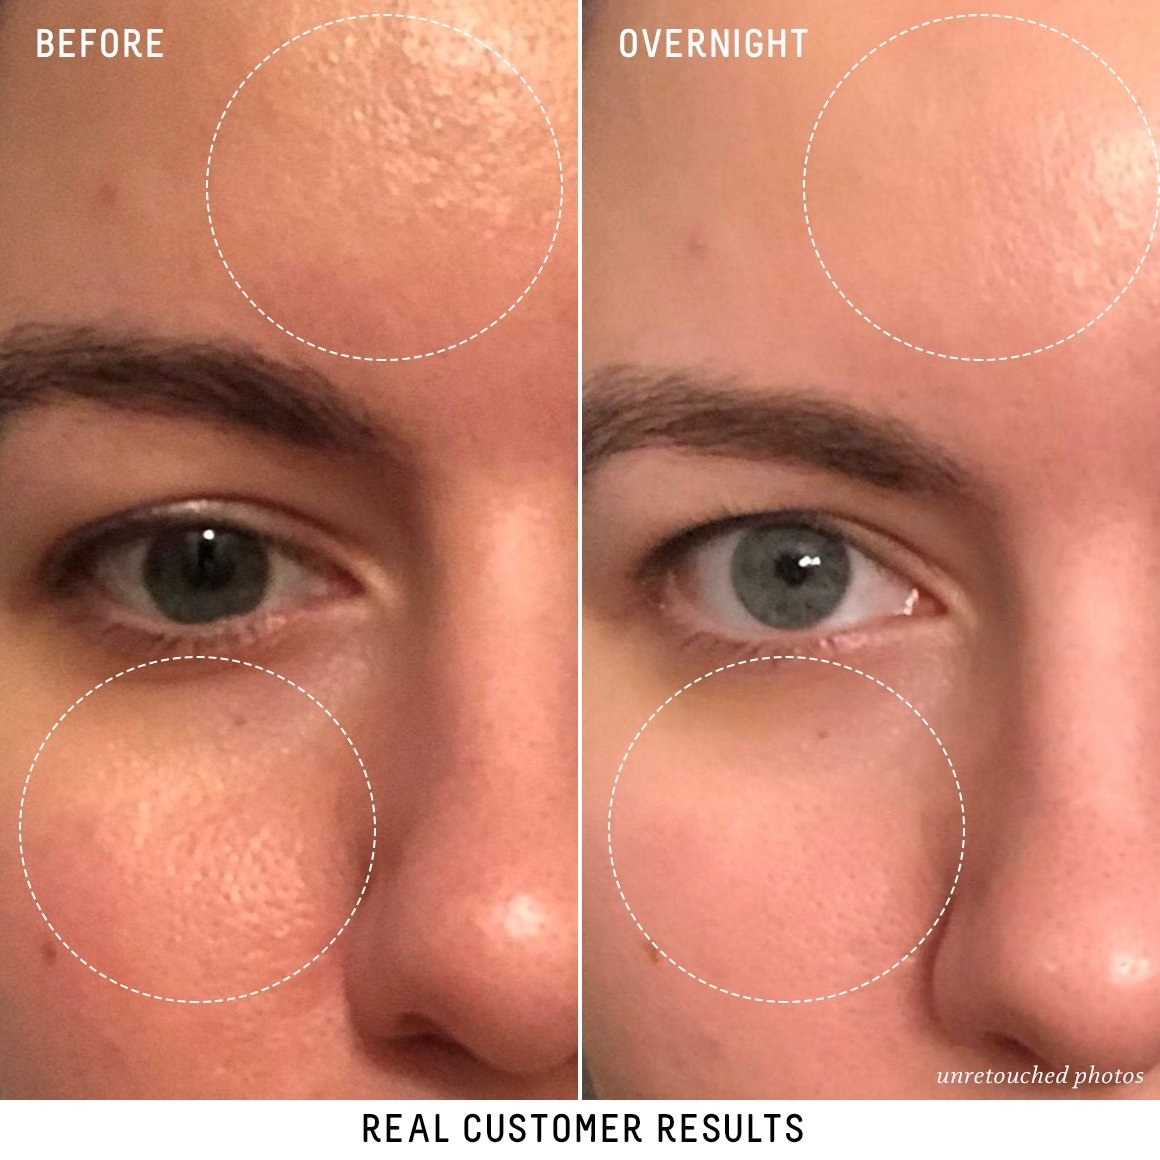 user before and after showing textured skin and open pores, then smooth poreless skin after using product